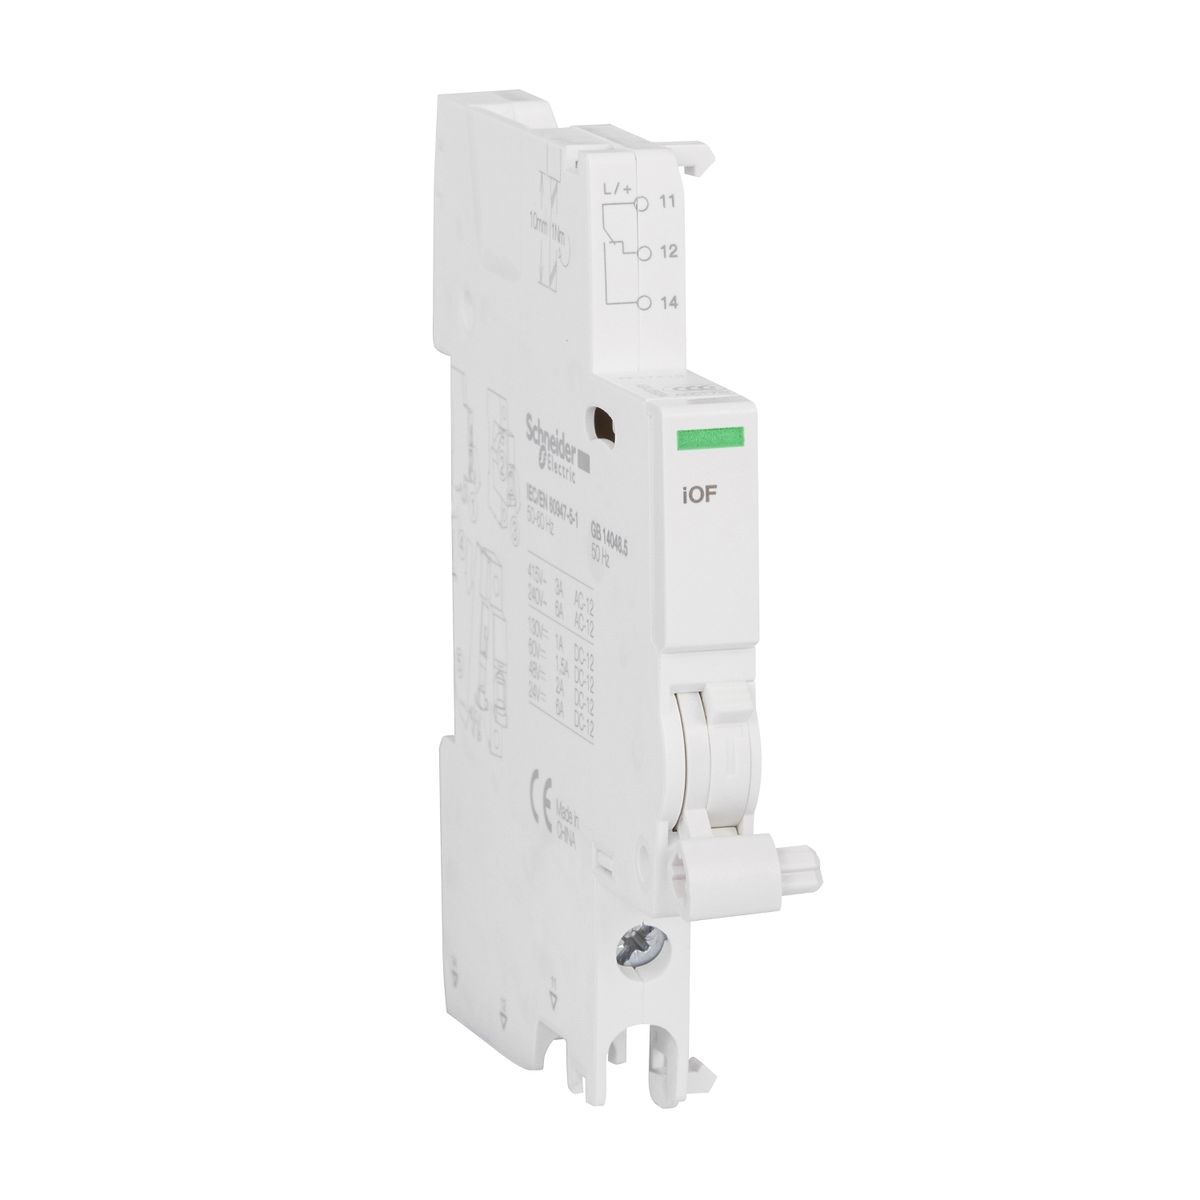 A9A26924 - Acti9, iOF OF auxiliary contact 240...415VAC 24...130VDC - Schneider Electric - 0